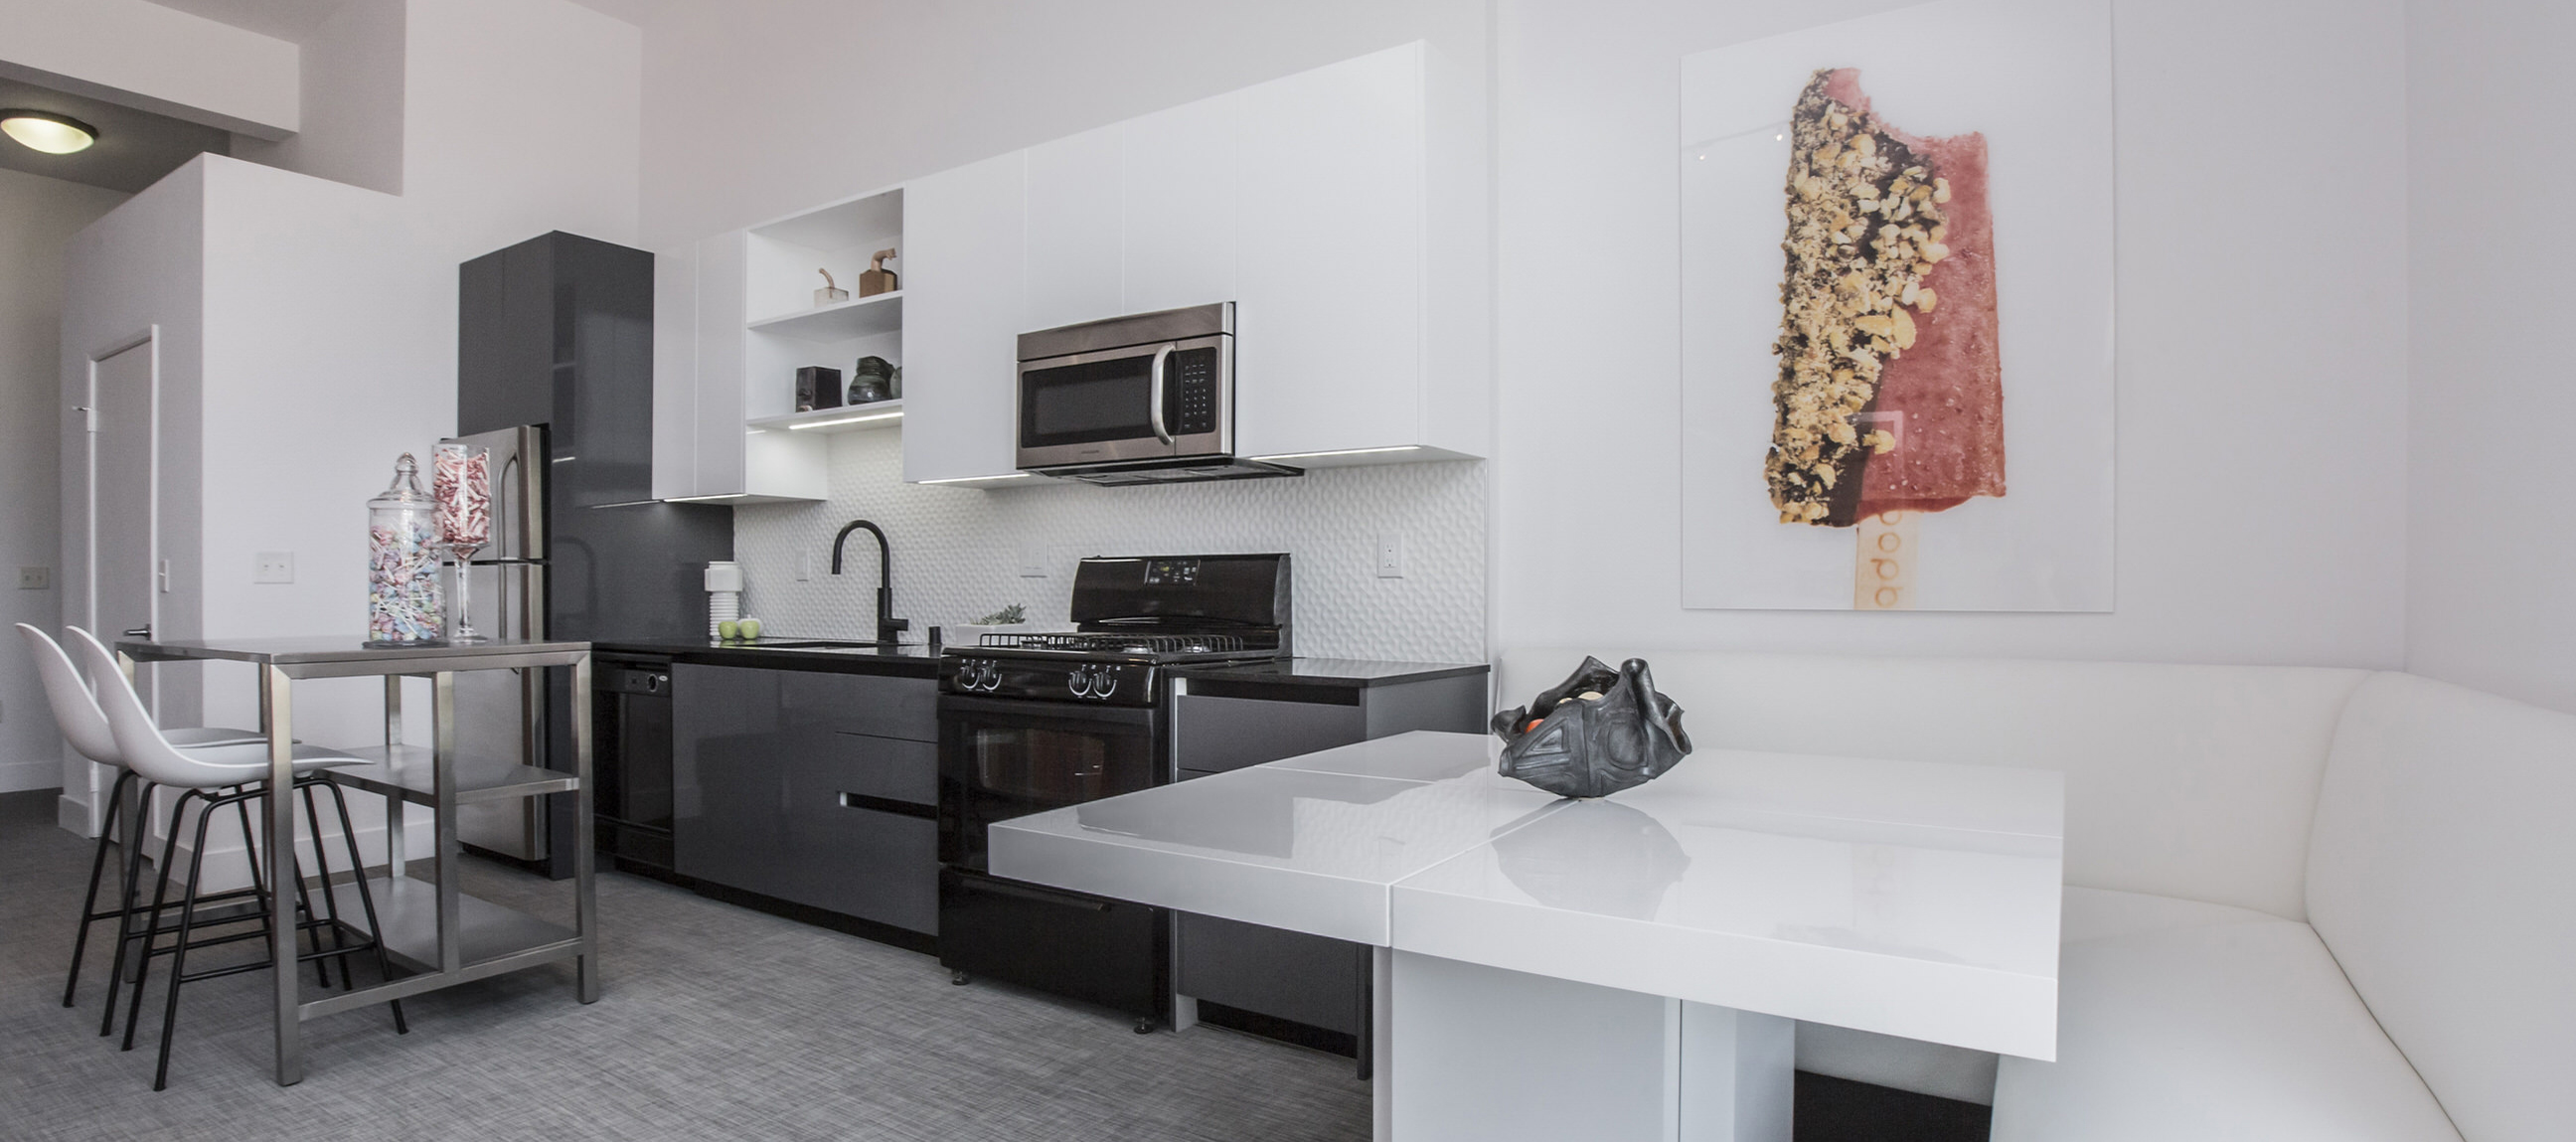 Photo of kitchen and dining area at Lofts at NoHo Commons Apartments in North Hollywood, Los Angeles.